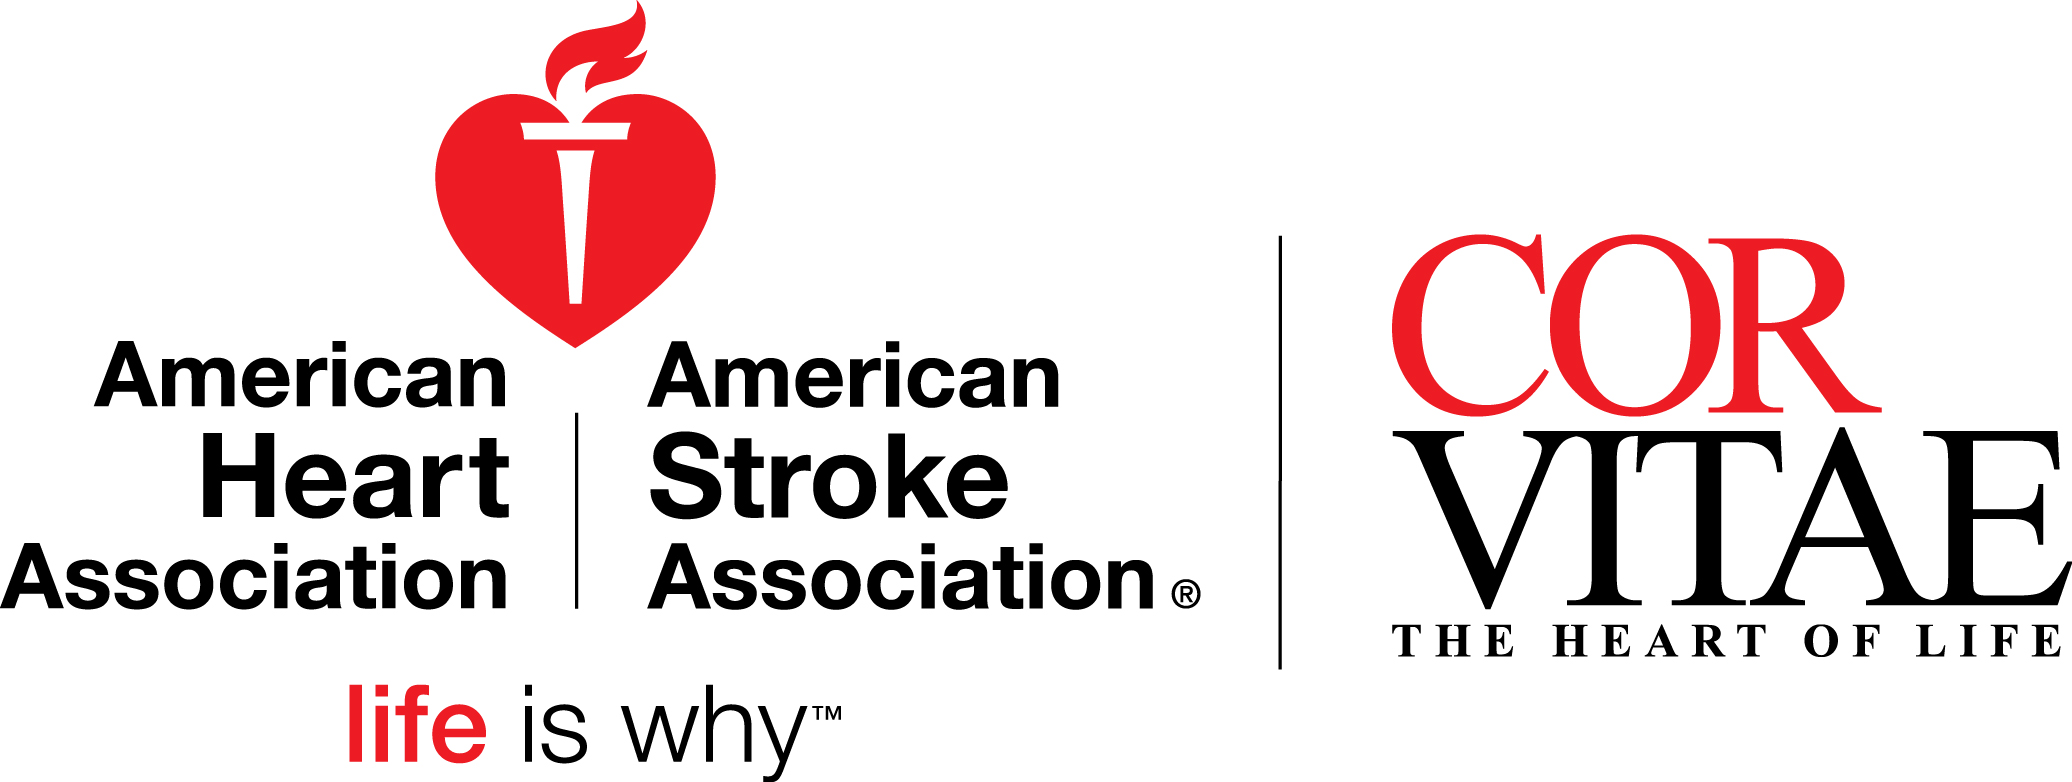 American Heart Association American Stroke Association Life is Why Cor Vitae The Heart of Life